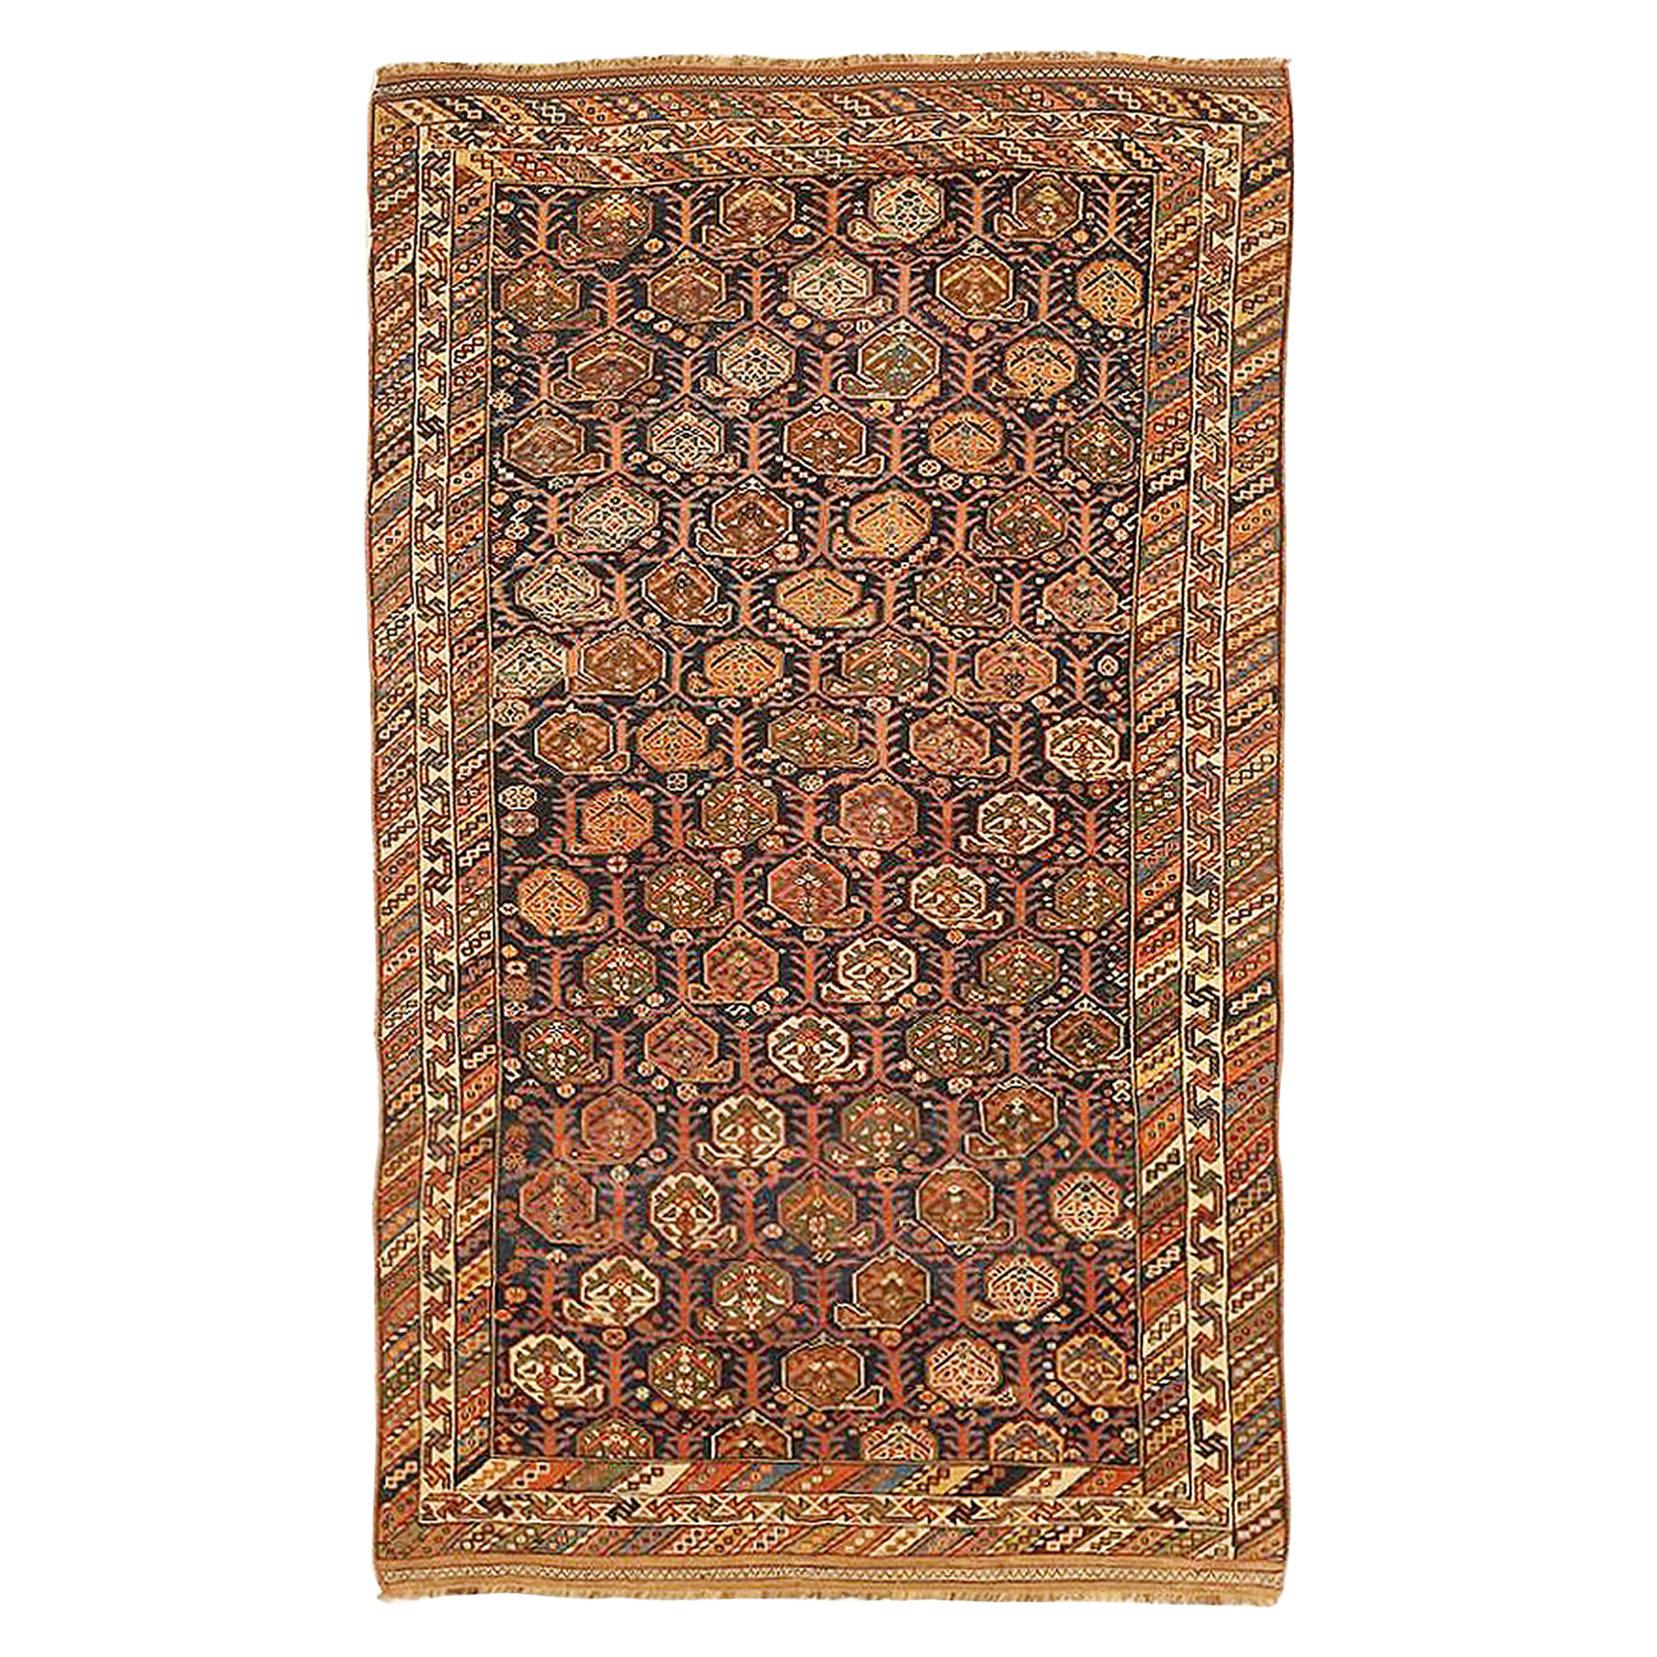 Antique Persian Shiraz Rug with Green and Brown Floral Medallions All-Over